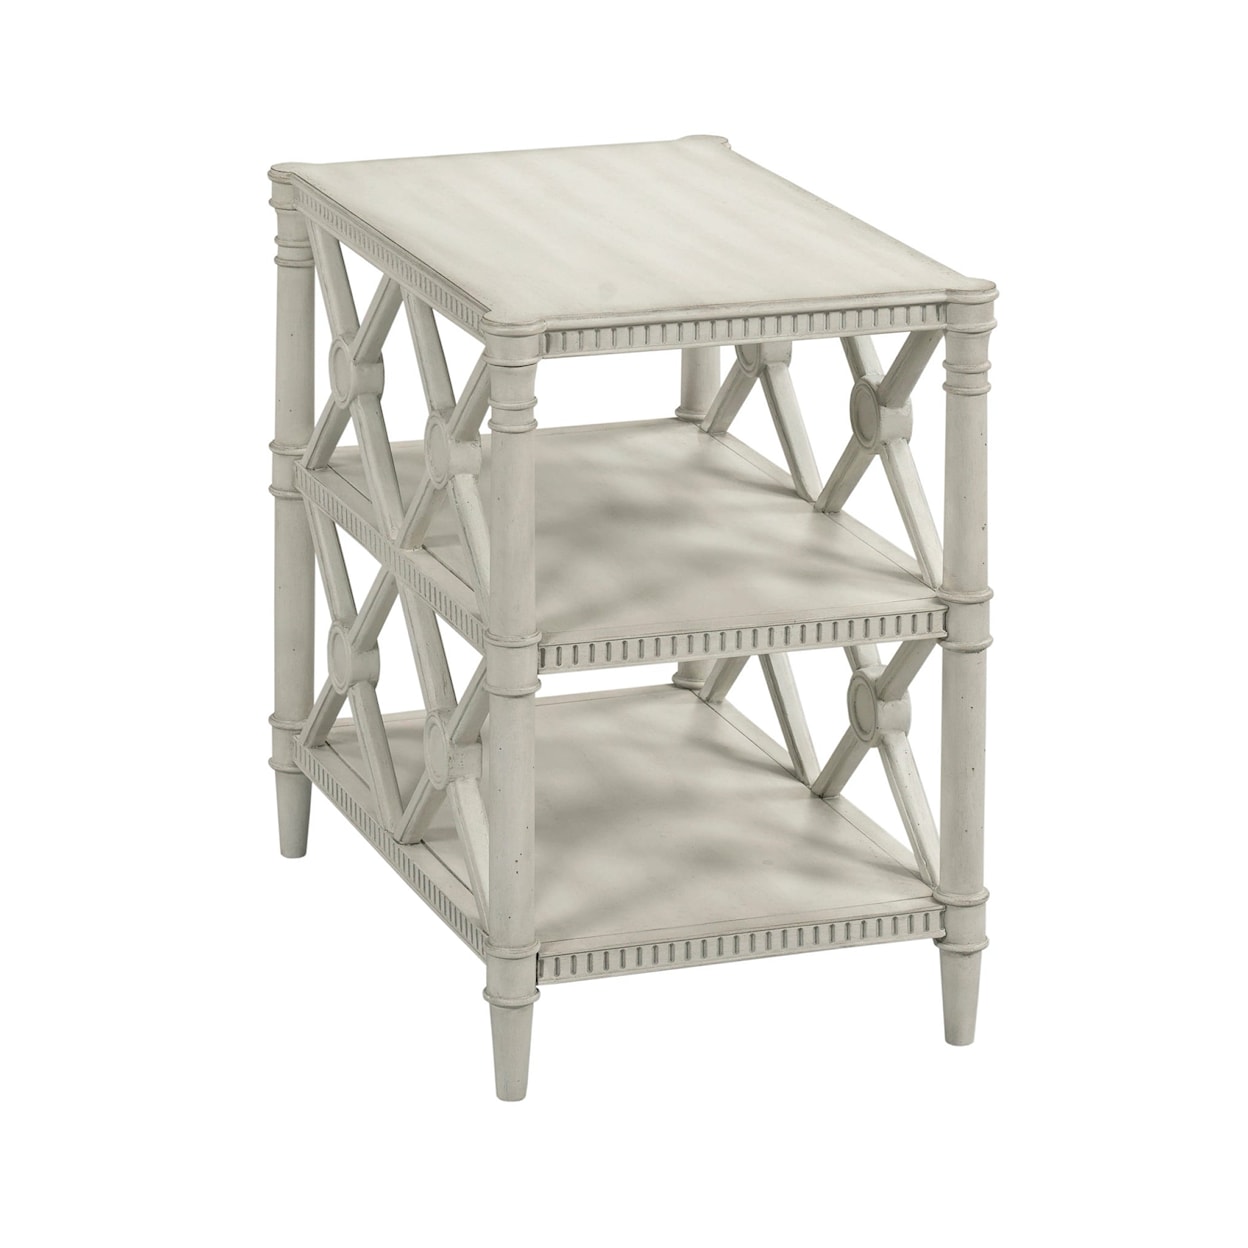 Hammary Terrace Chairside Table